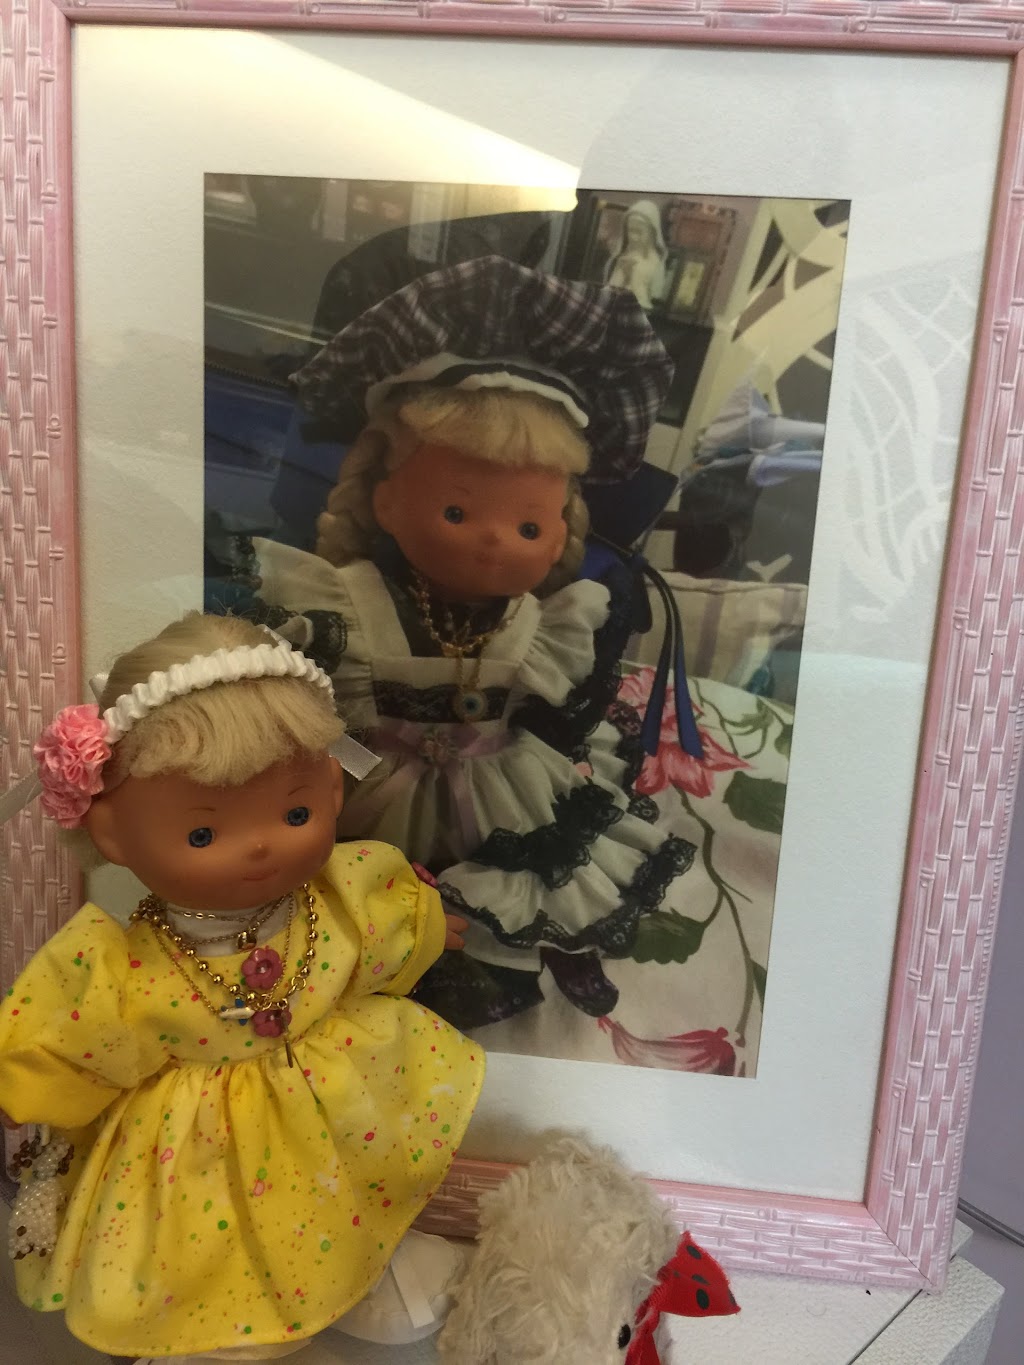 Vees Victorians Doll Clothes | Photo 7 of 7 | Address: 924 198th Pl SW, Lynnwood, WA 98036, USA | Phone: (800) 448-6763